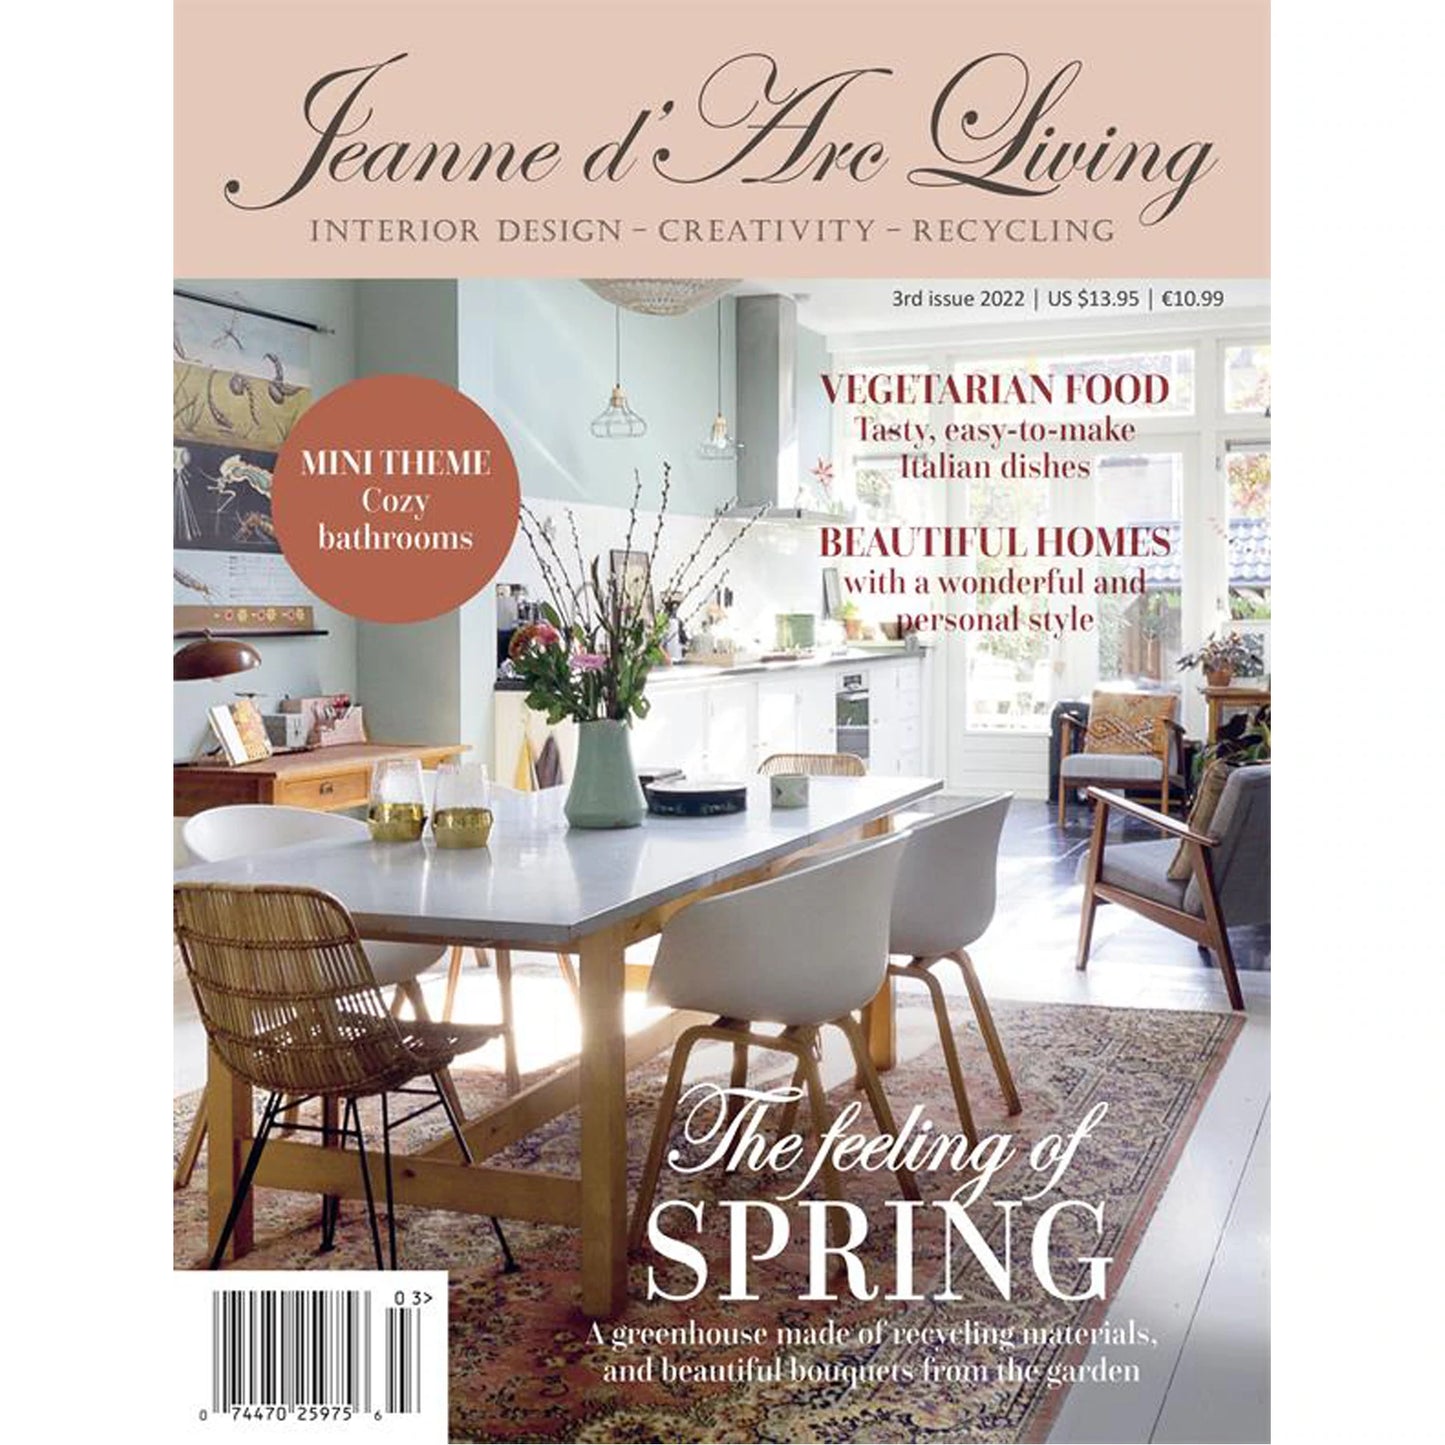 Jeanne D' Arc Living Magazine - 2022 3rd Issue